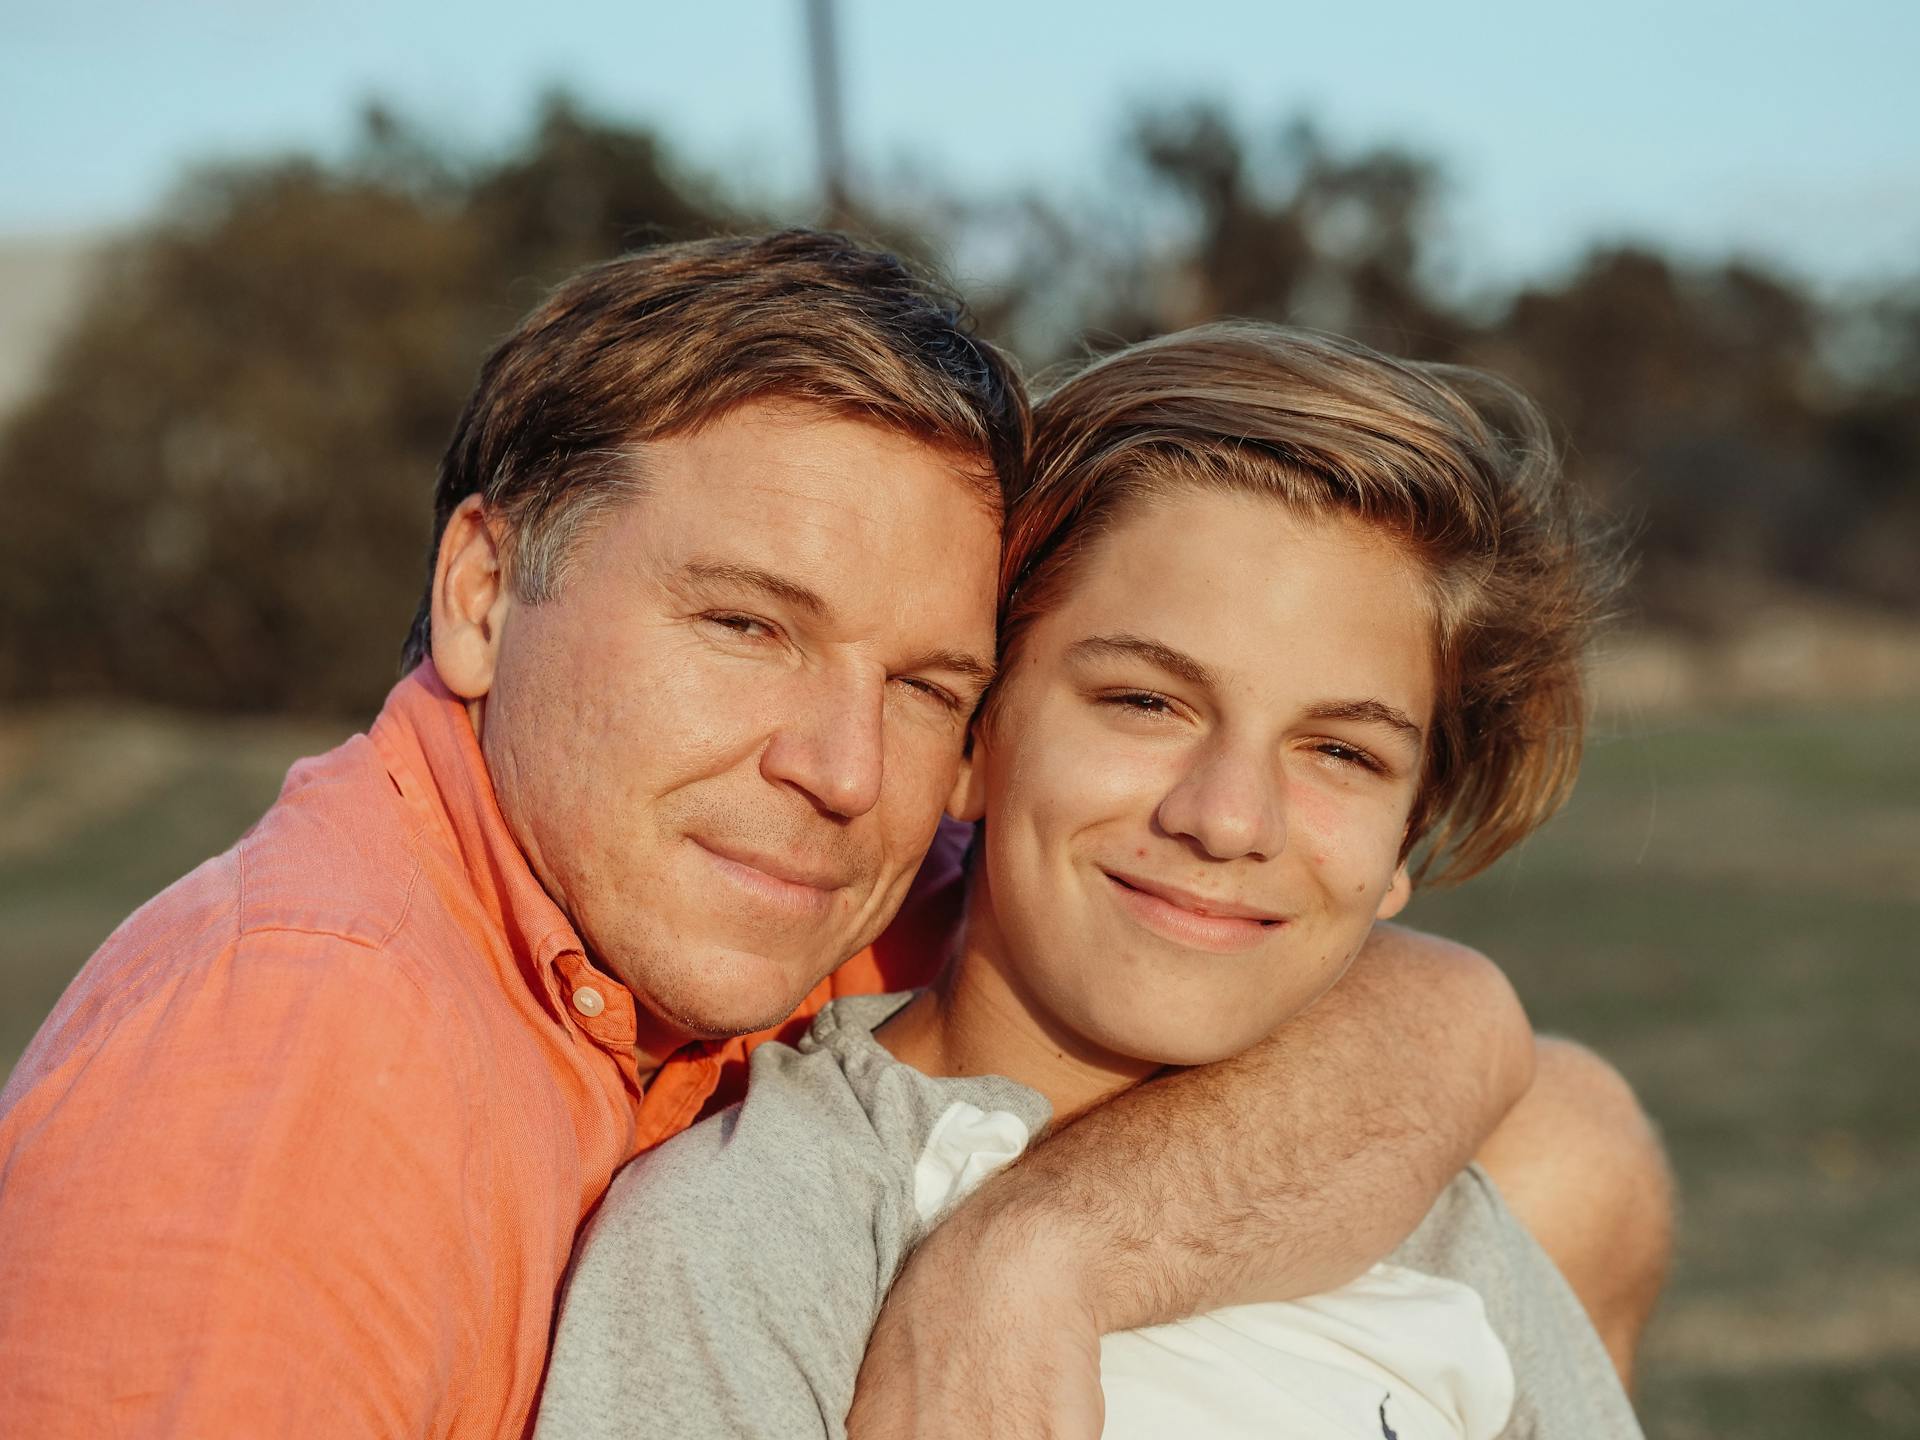 A father and son posing together | Source: Pexels